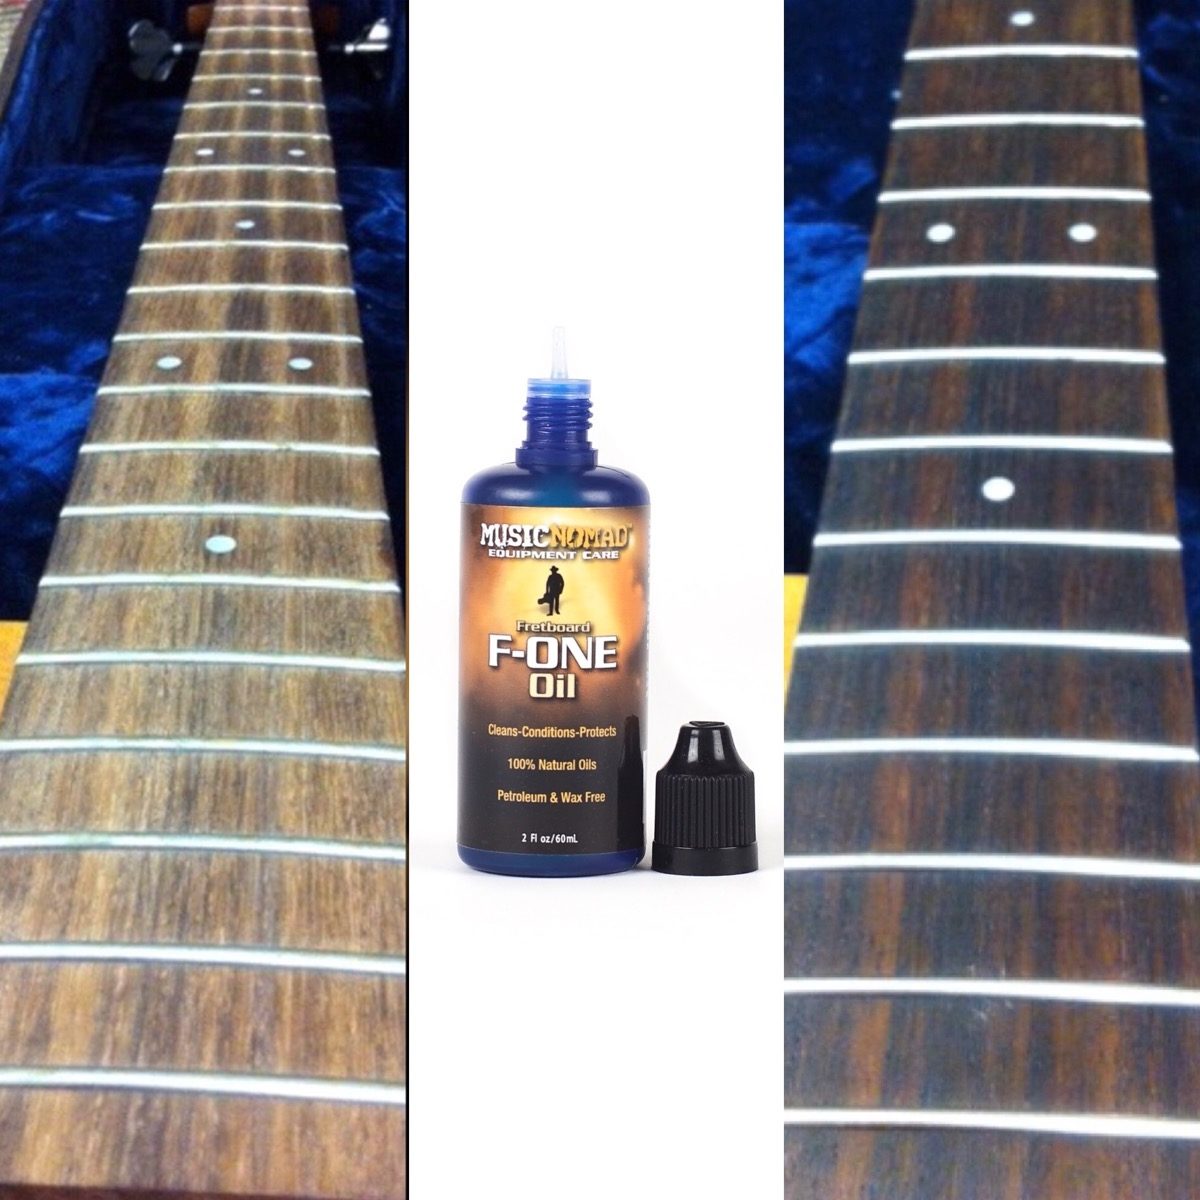 Music Nomad MN125 F-One Unfinished Fretboard Care Kit - Oil, Cloth, Br –  Easy Music Center